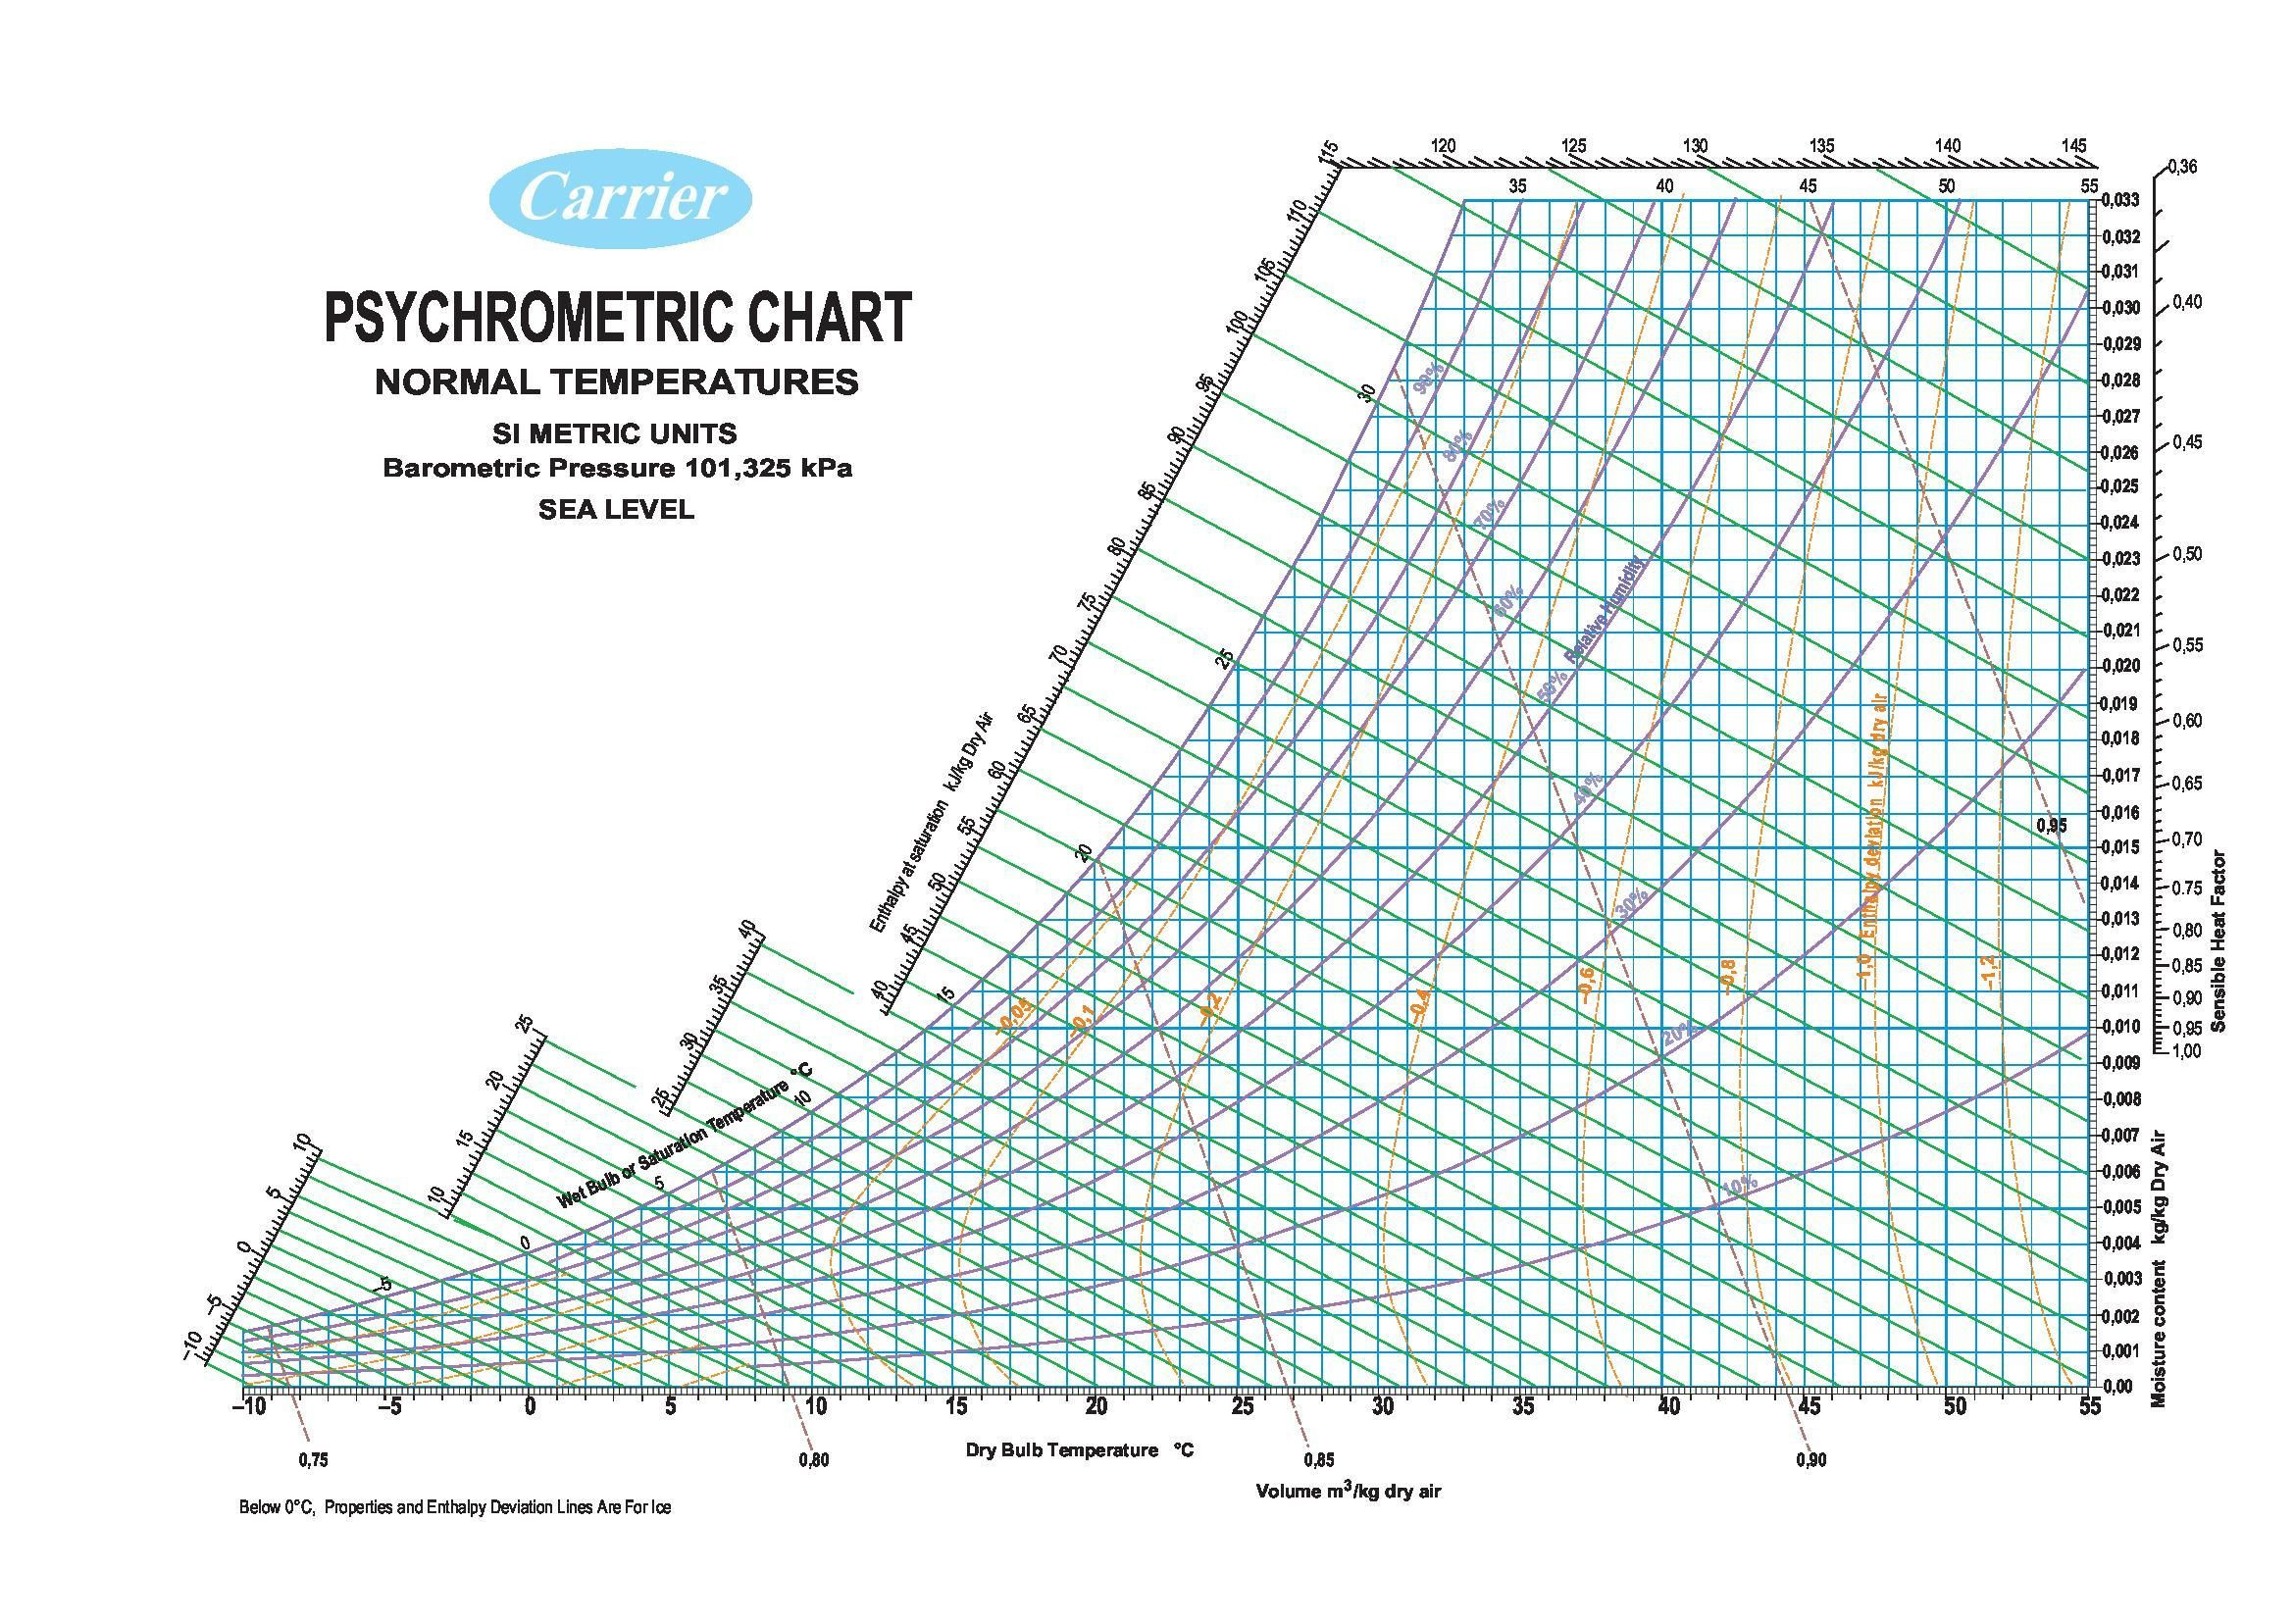 How To Find Bulb Temperature Using Psychrometric Chart